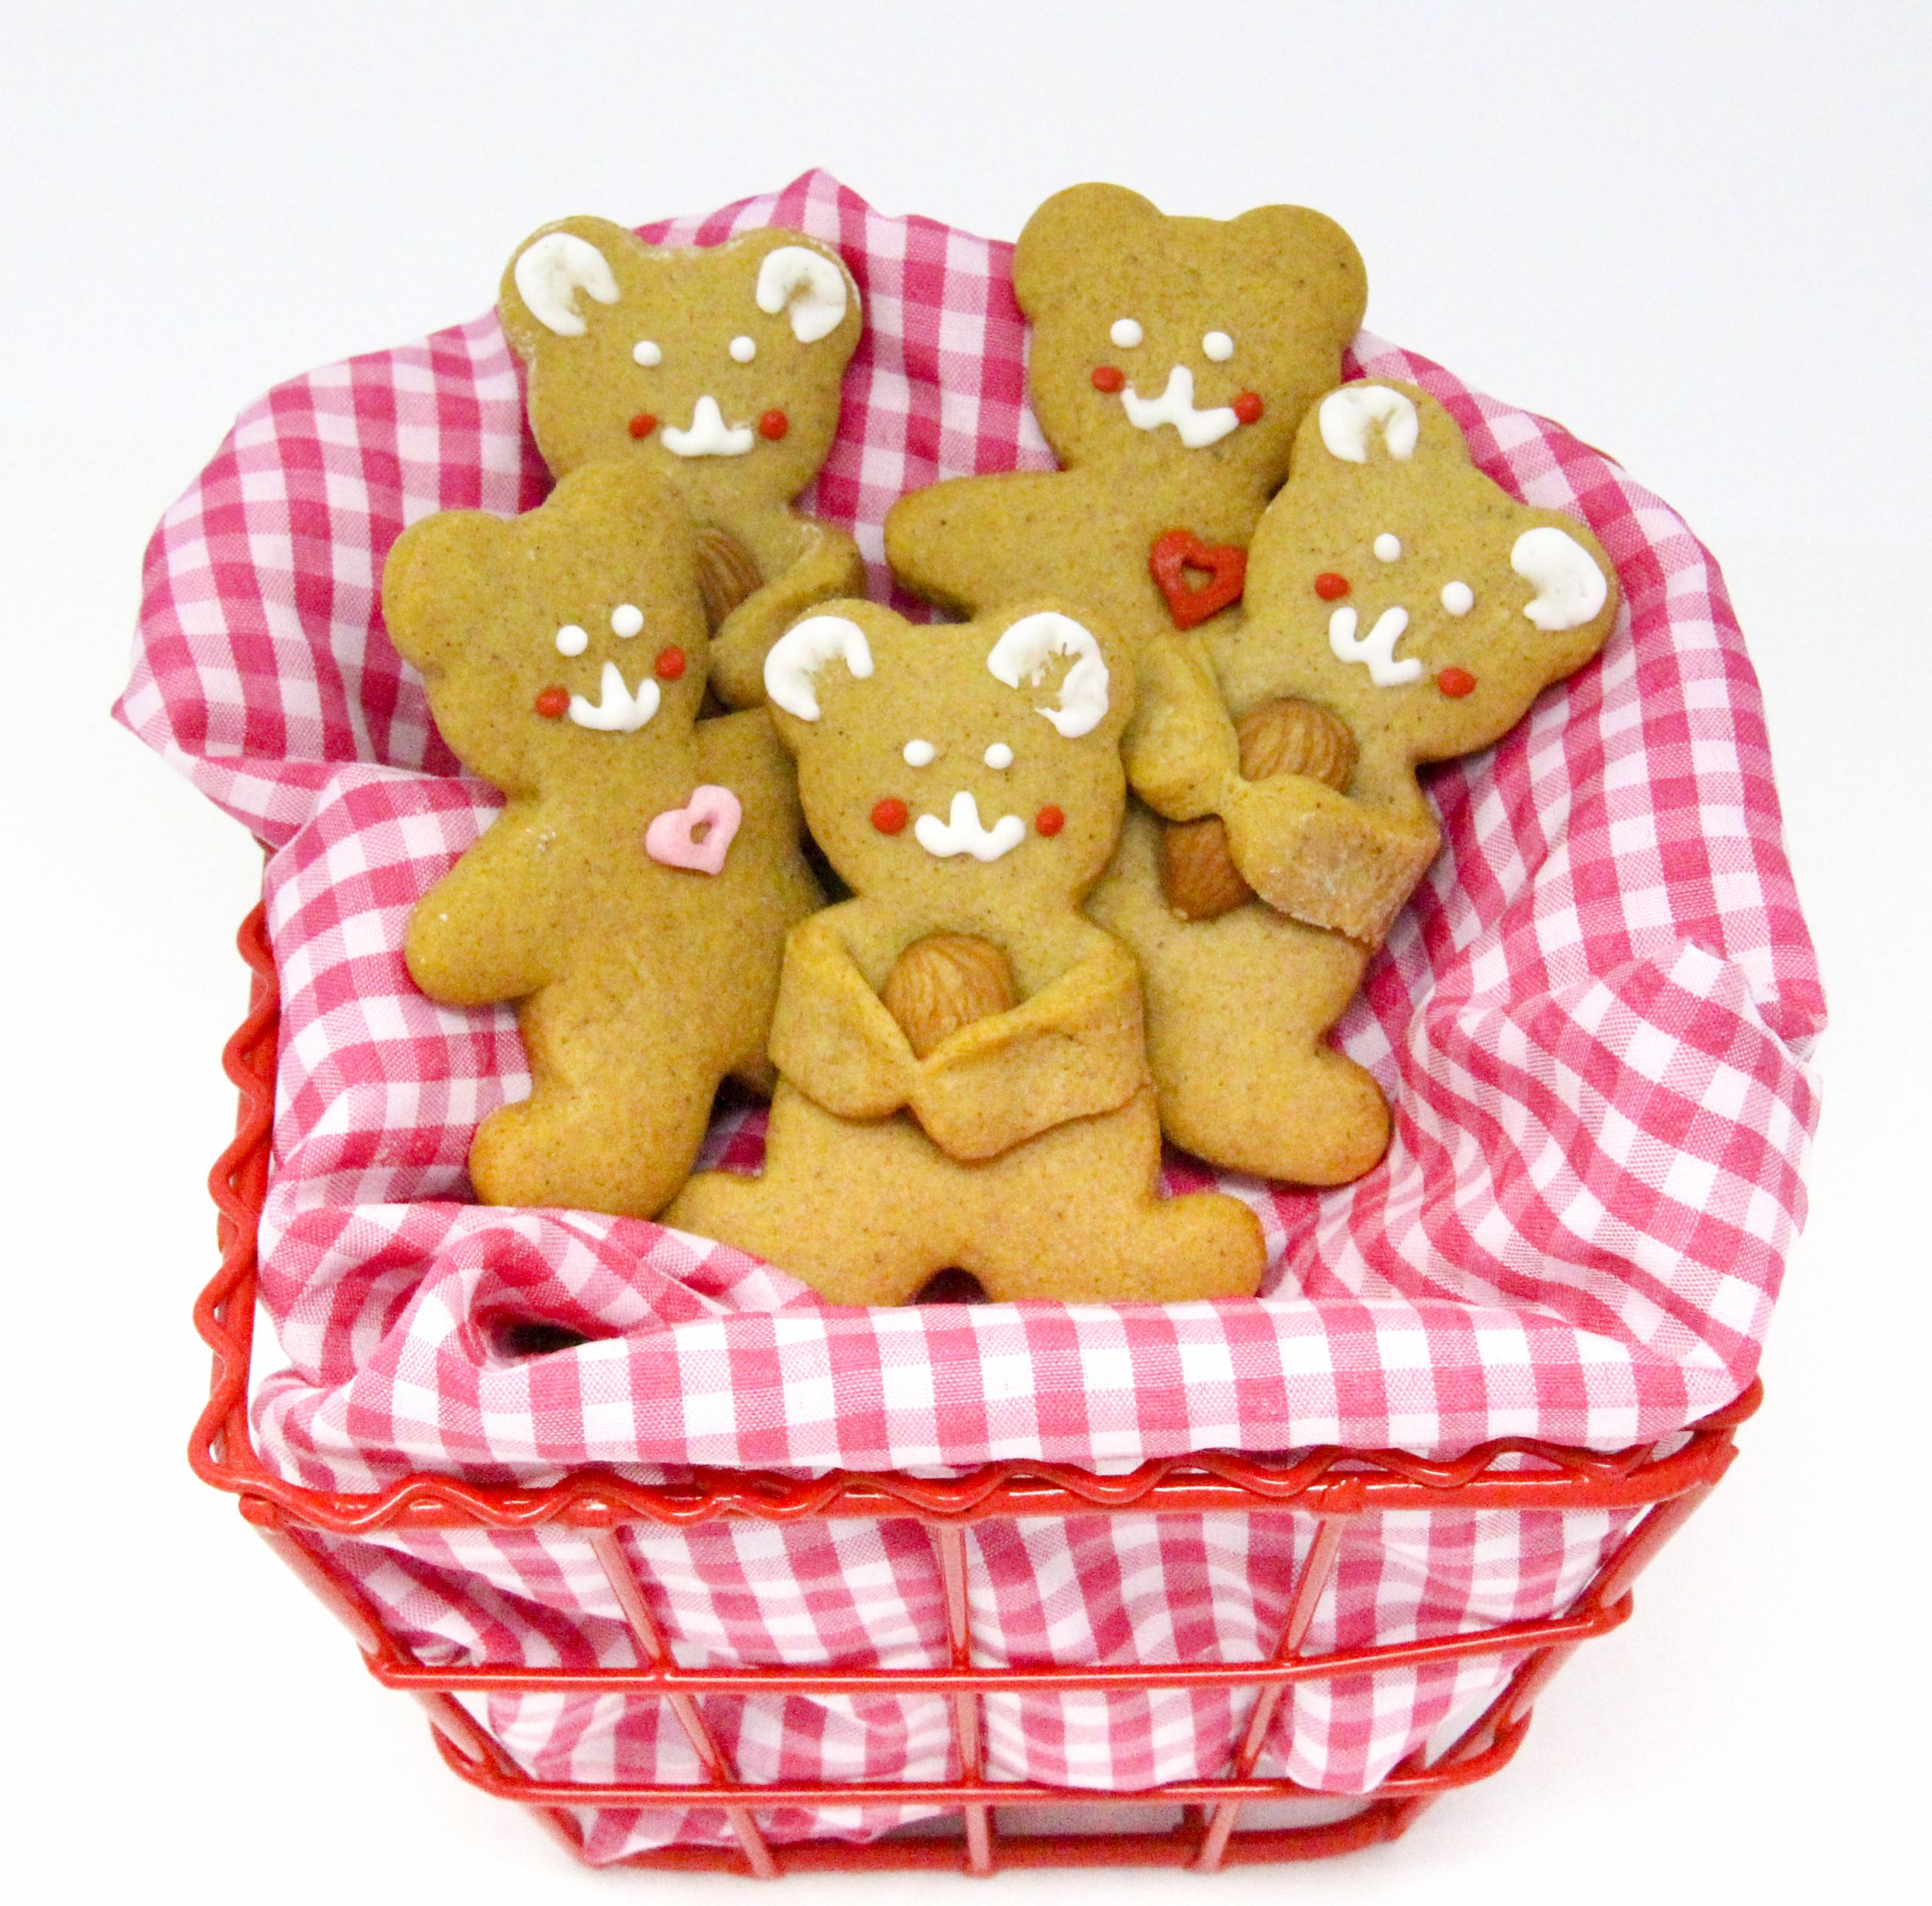 Using your favorite rollout cookie dough (or see my favorite sugar cookie recipe on the blog) these adorable teddy bears almond cookies have hugs to share! Recipe created by Cinnamon & Sugar for Meg Macy, author of Bear A Wee Grudge. 